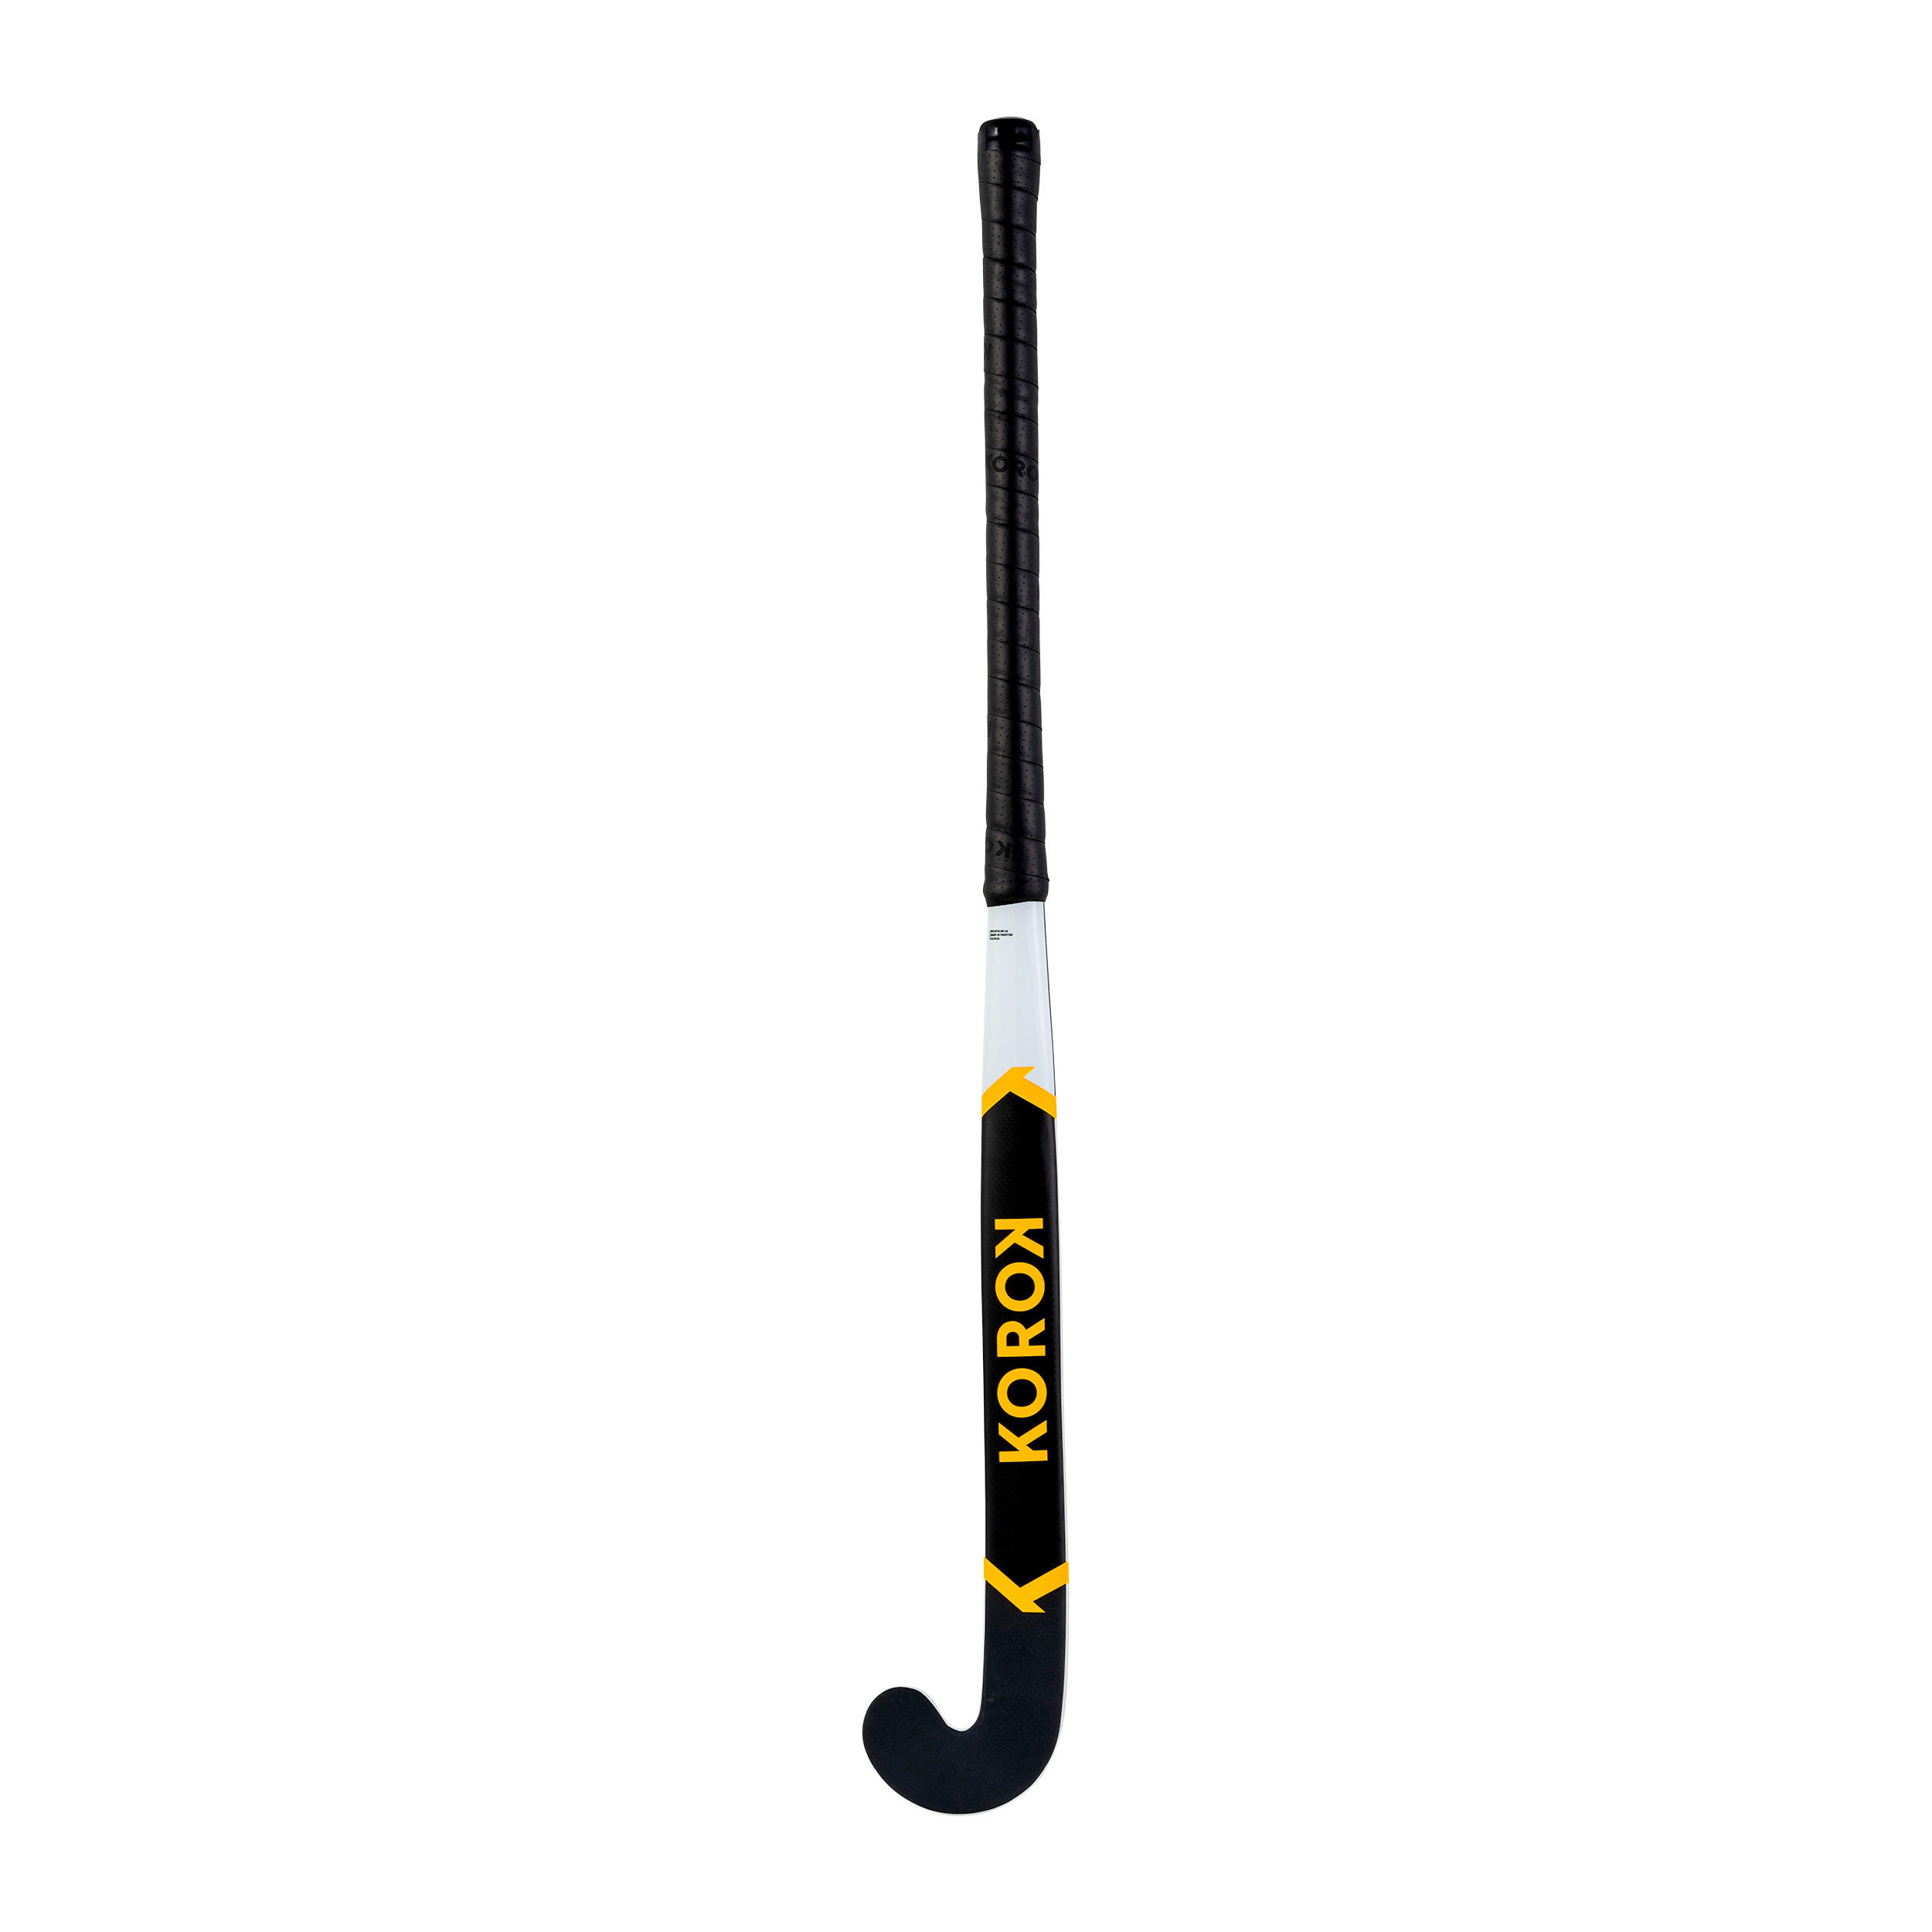 Adult Intermediate 60% Carbon Low Bow Field Hockey Stick FH560 - White/Yellow 5/12